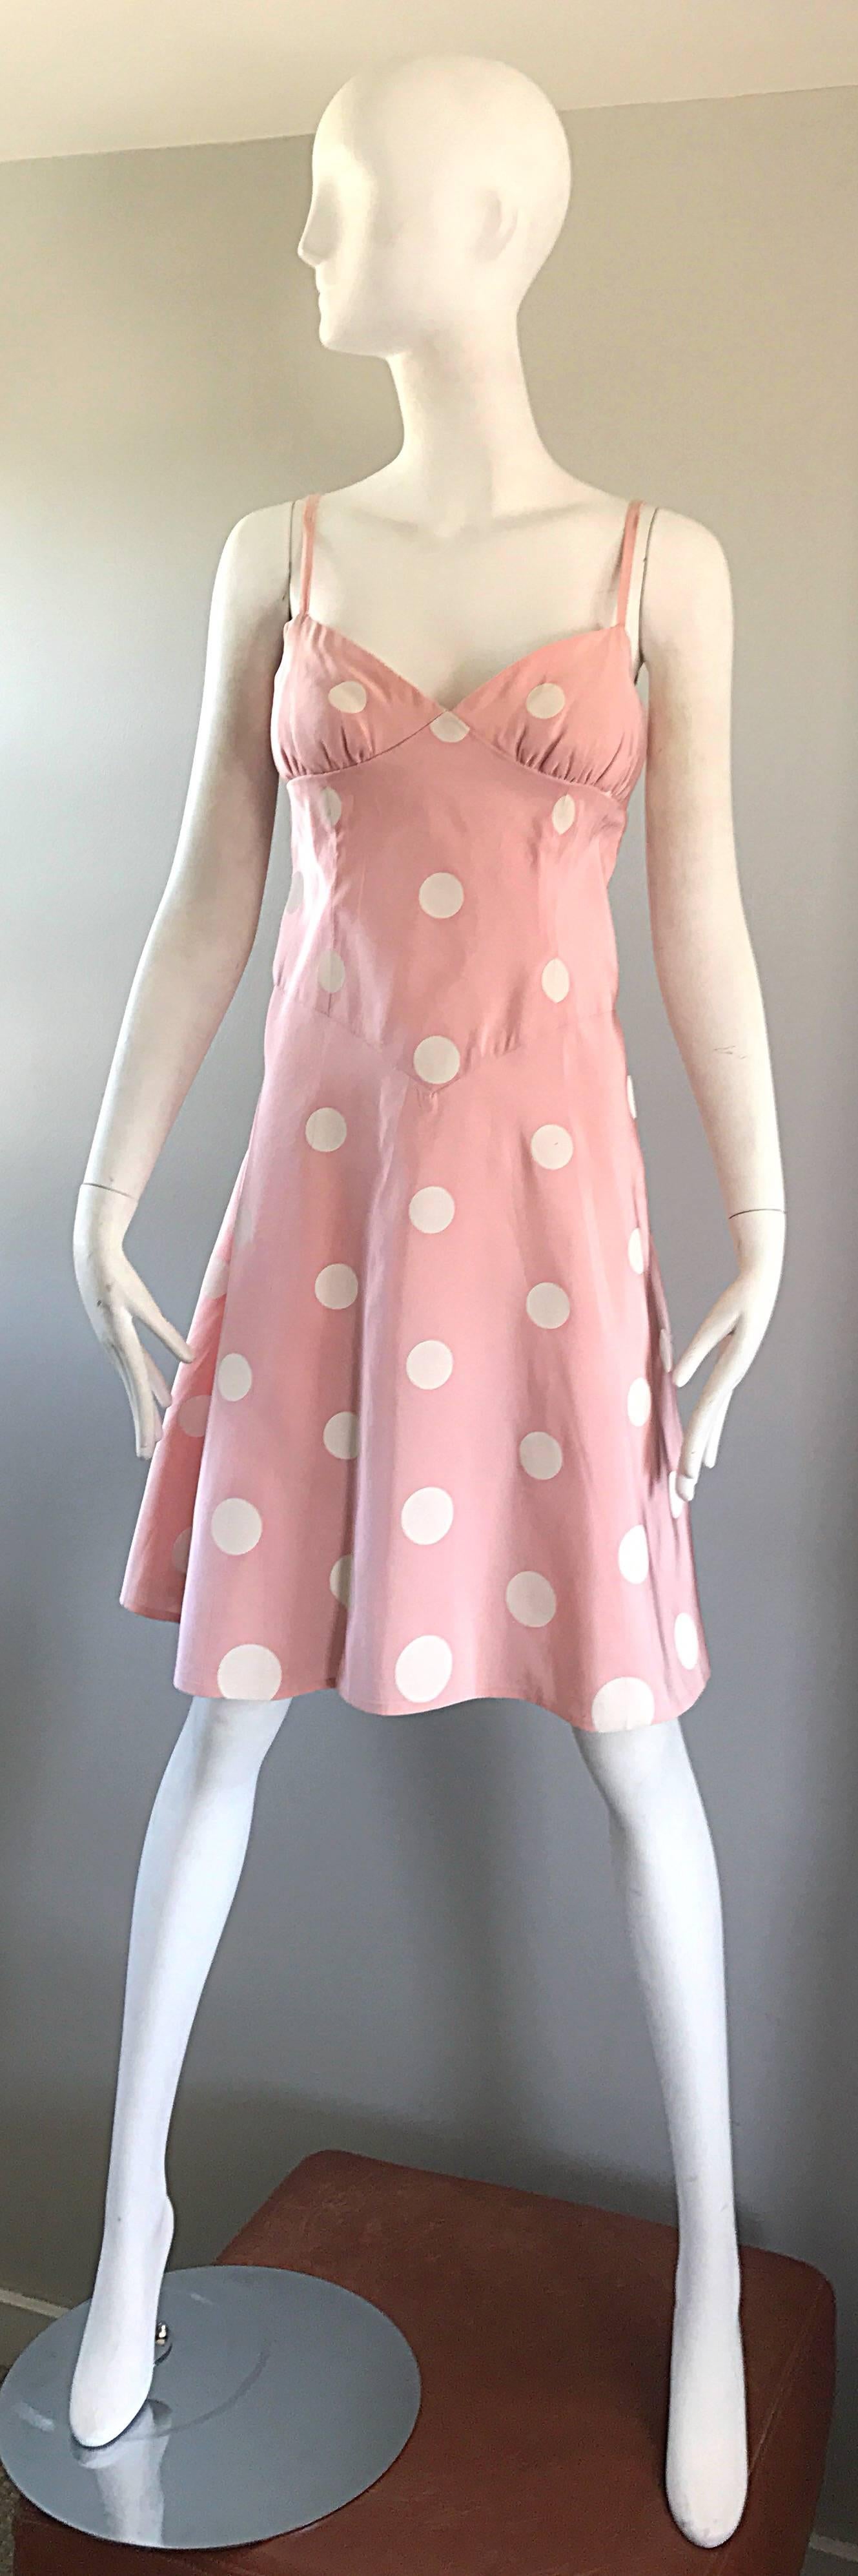 pink with white polka dots dress